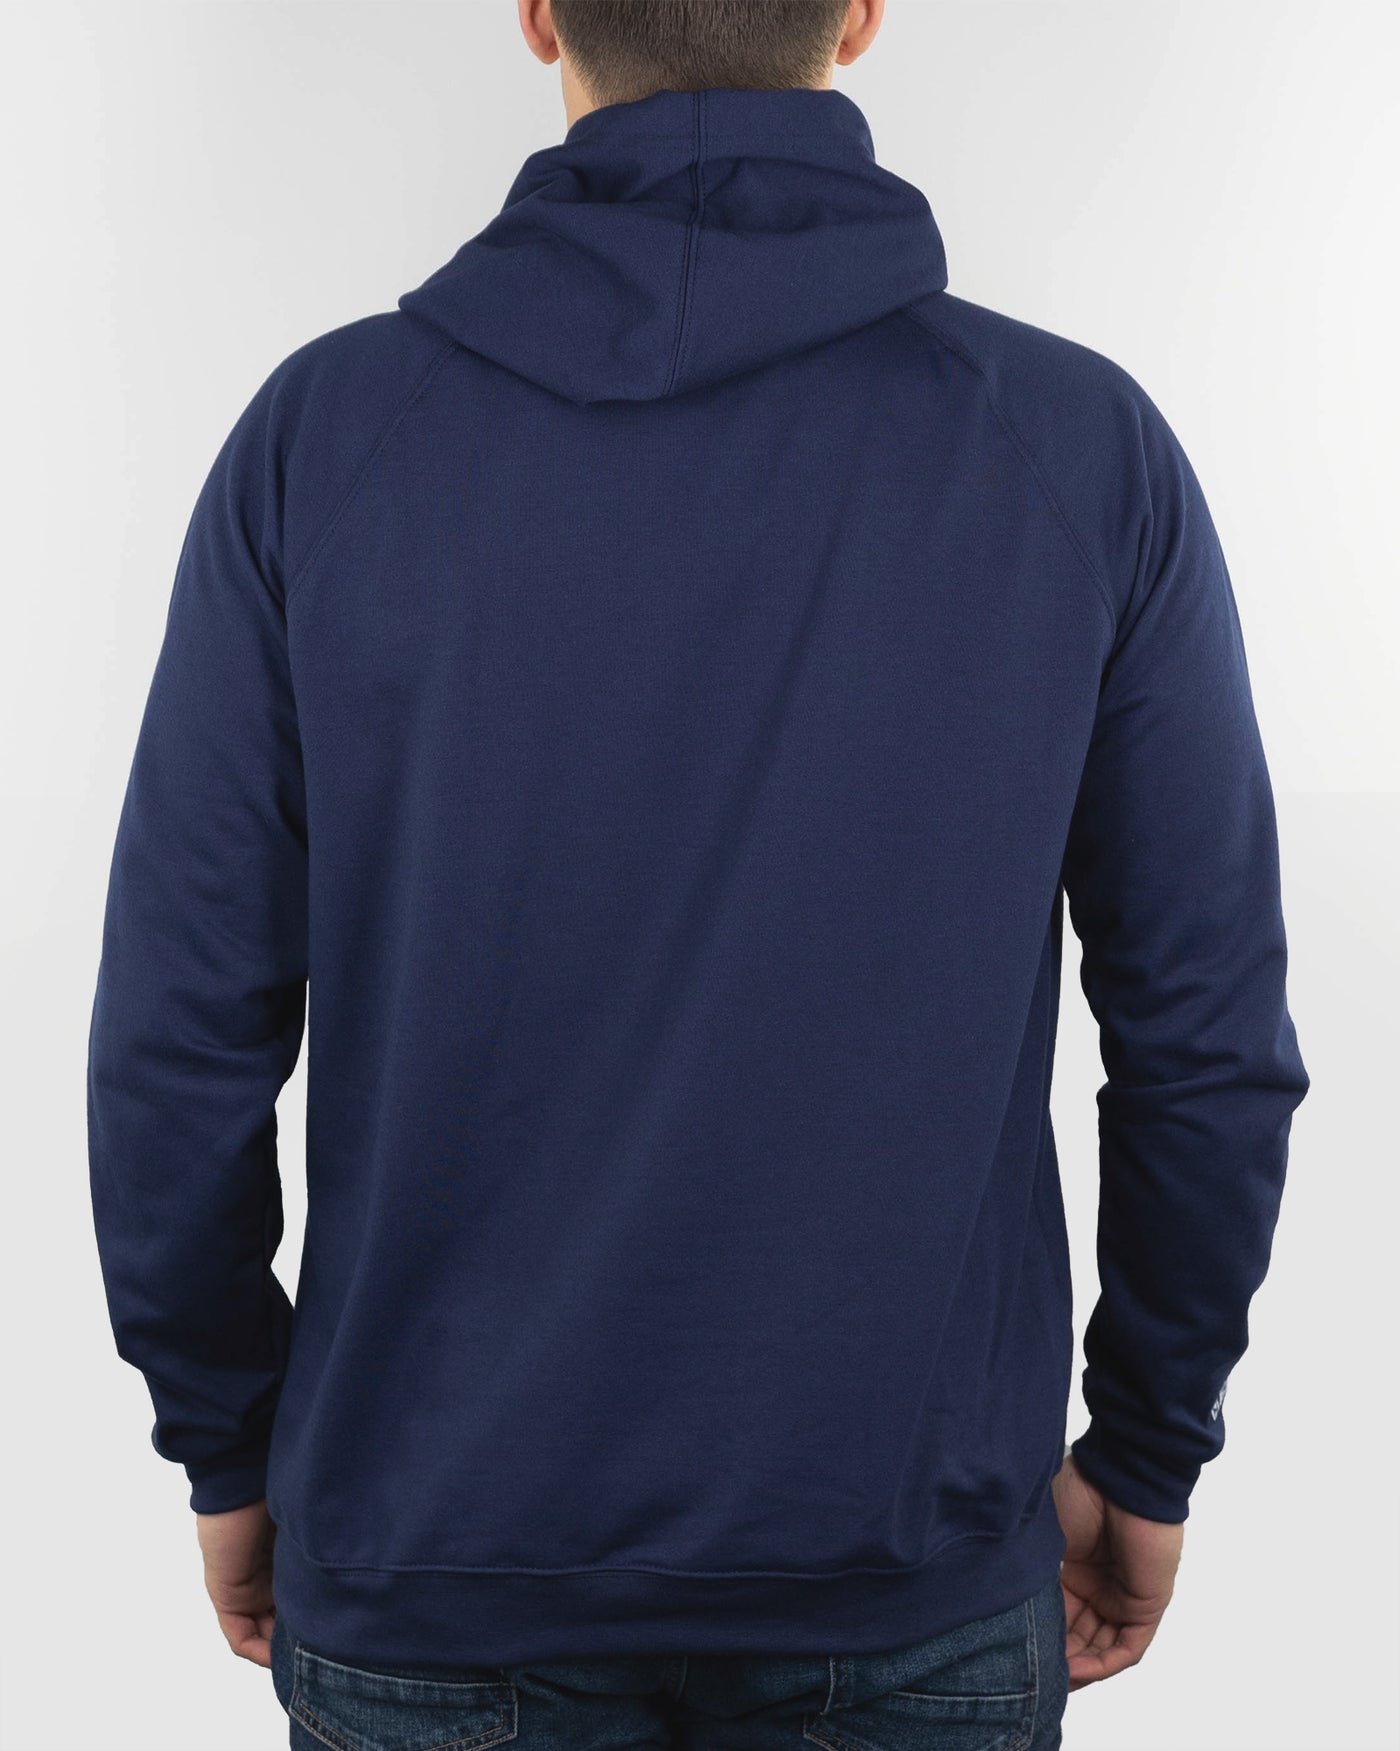 Outfield Fence Hoodie - New York Yankees